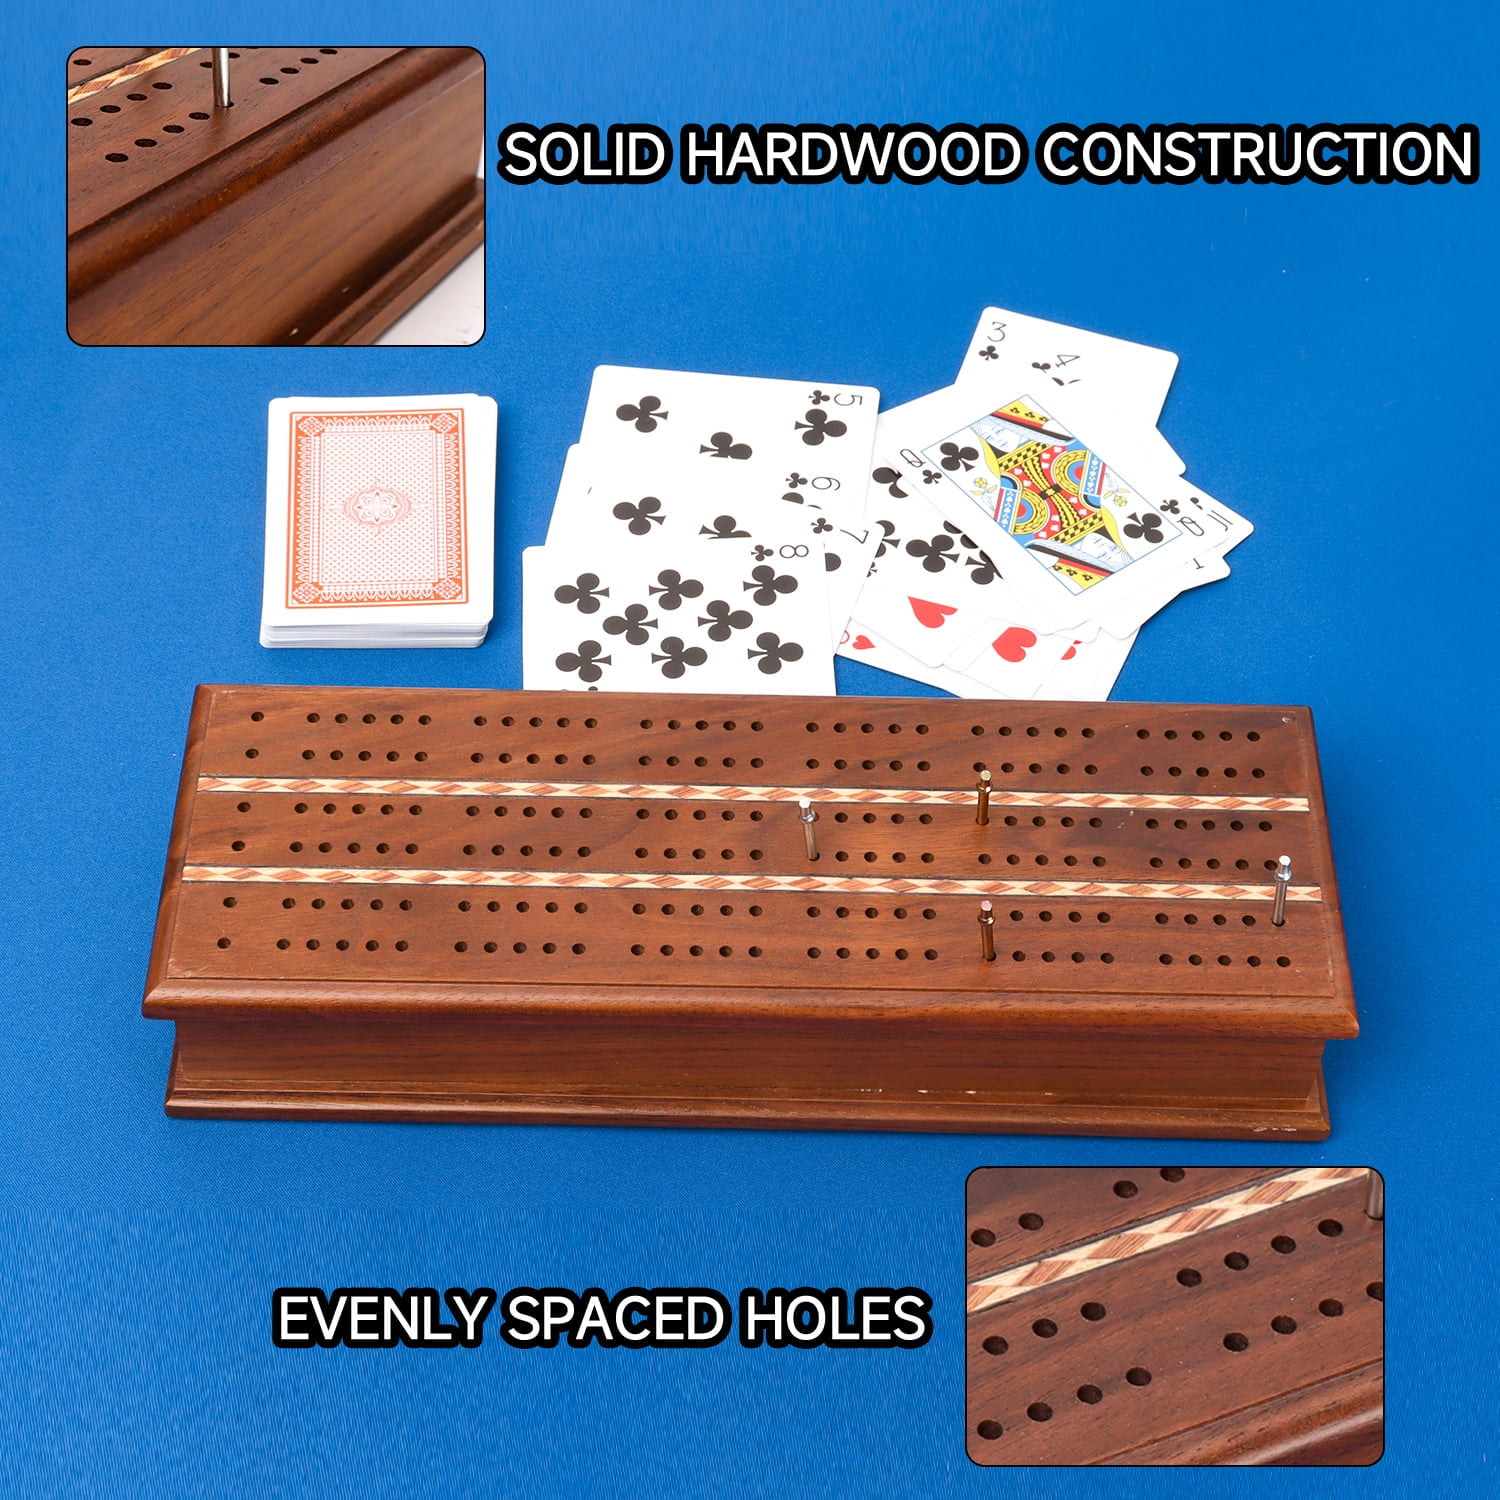  WE Games Wooden Cribbage Board Game Set with Storage, Solid  Wood Continuous 3 Track for 2-3 Players, Includes 9 Metal Pegs & Deck of  Cards, Great for Travel, for Adults and